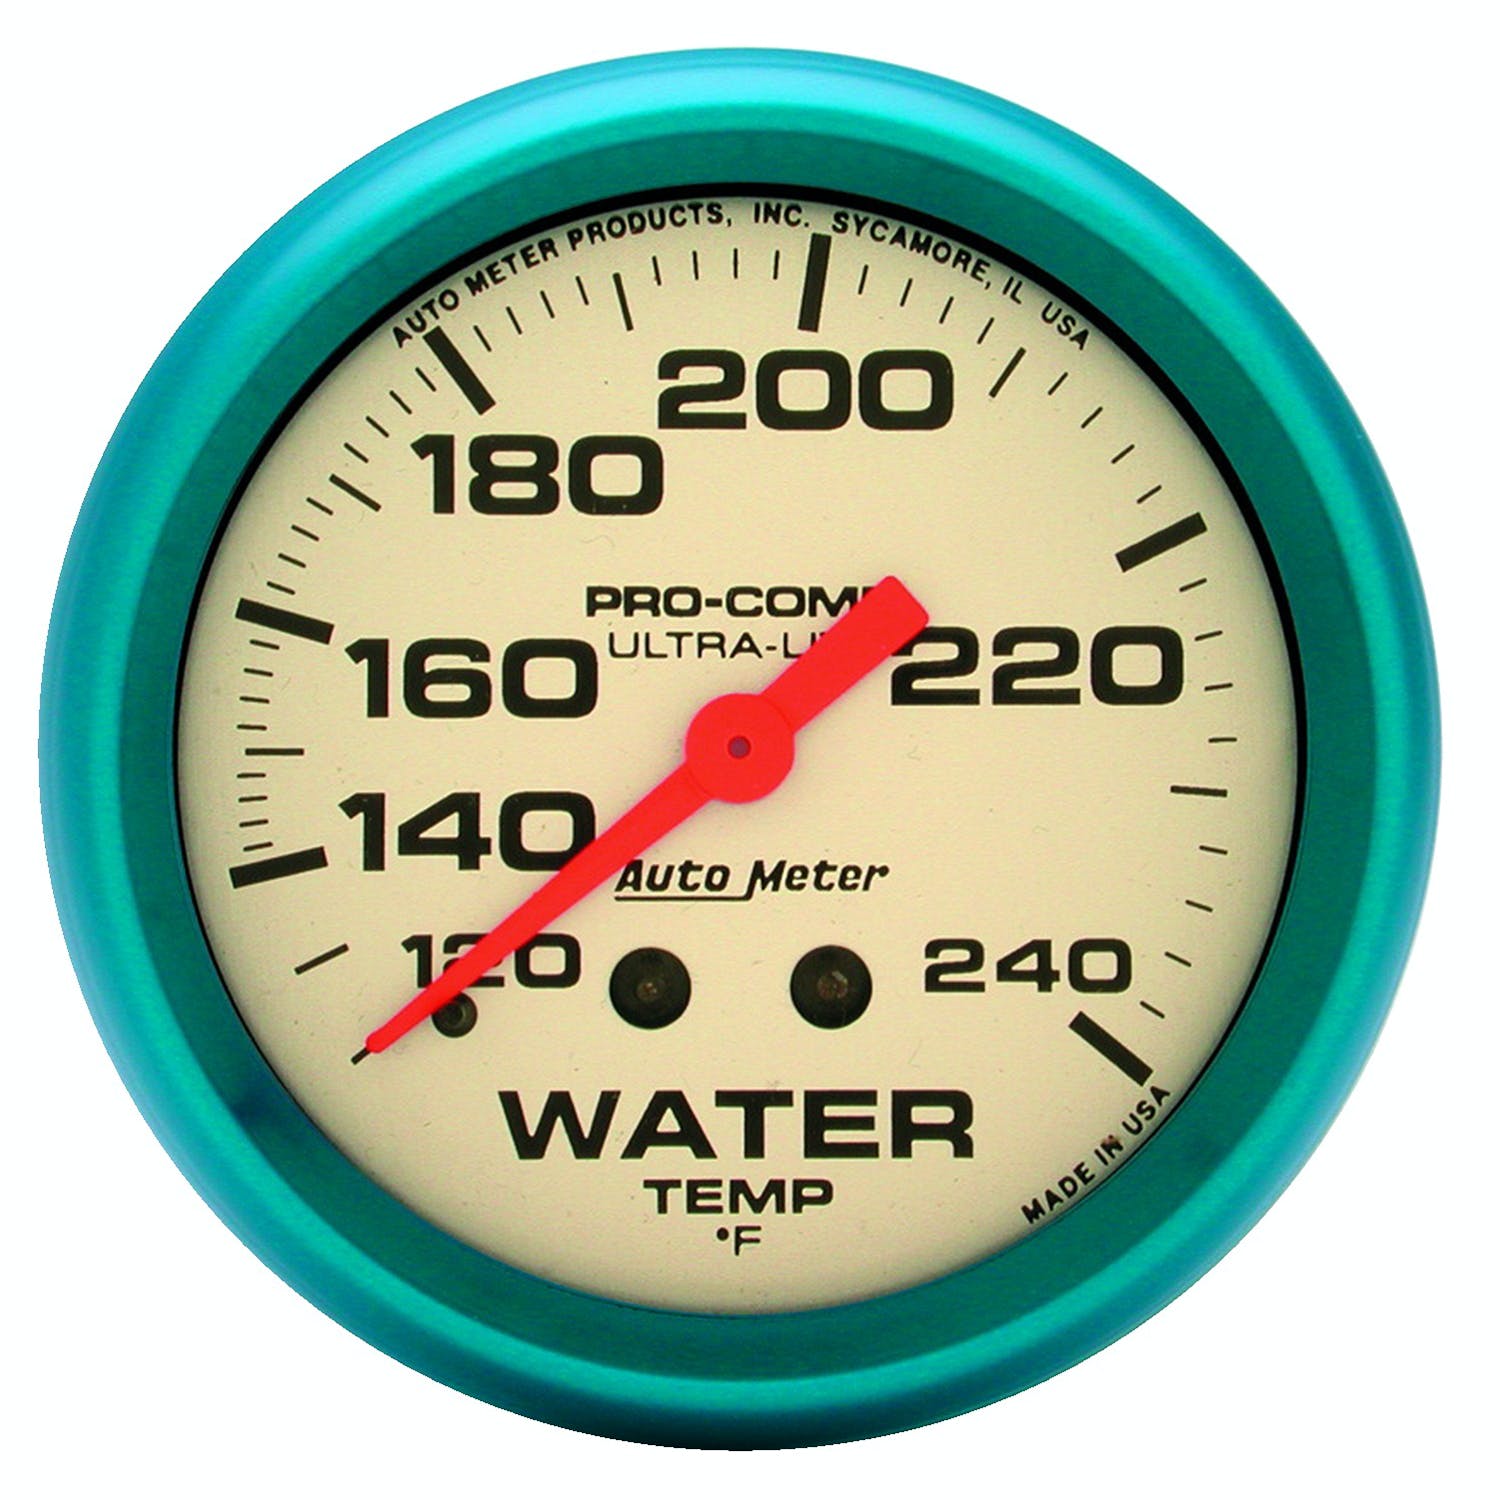 AutoMeter Products 4532 Water Temp 120-240 F